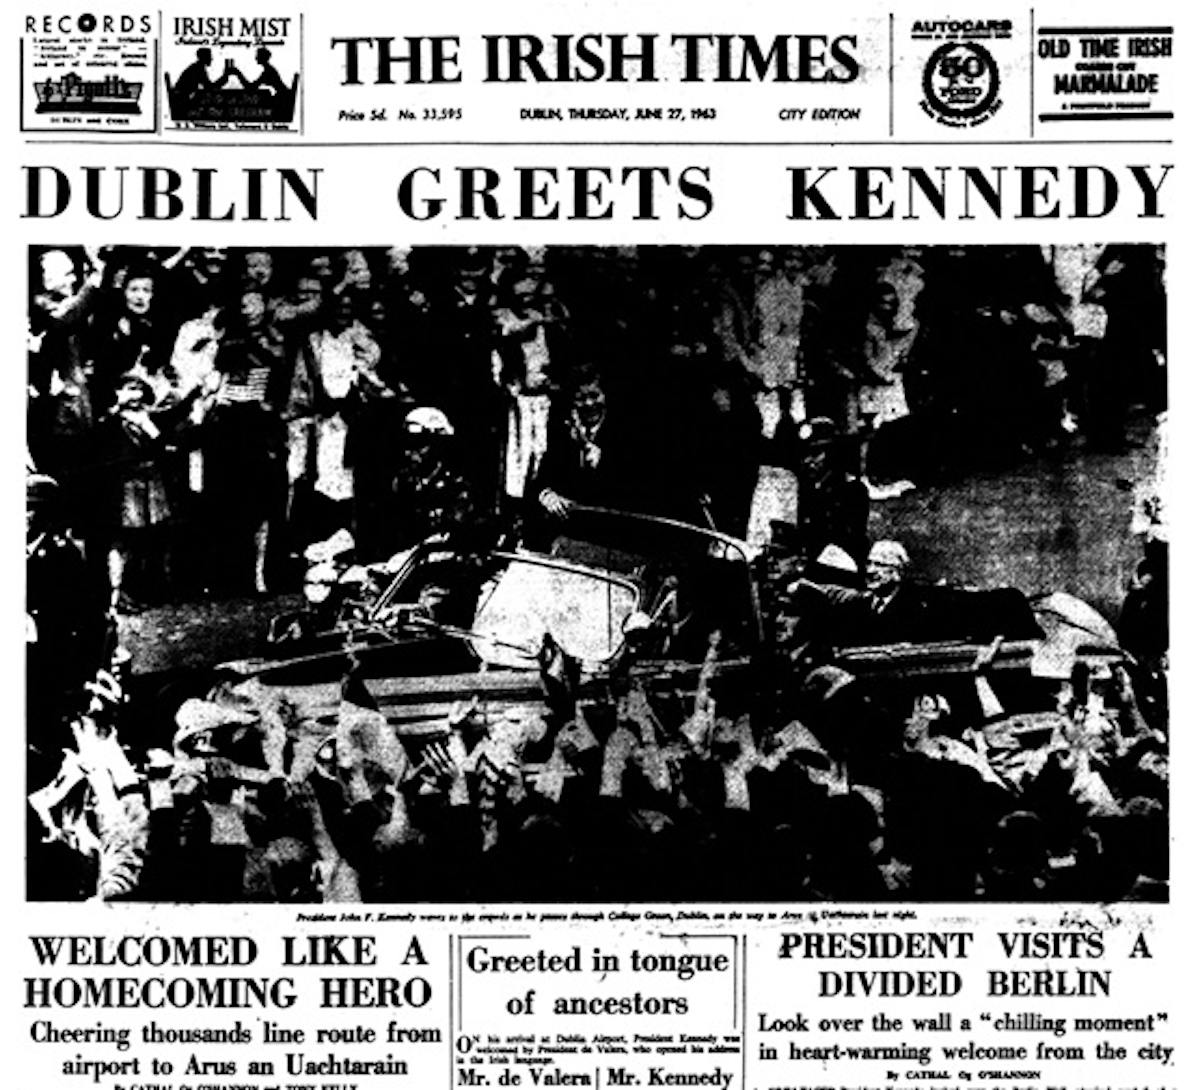 Irish Times front page when JFK visited Ireland